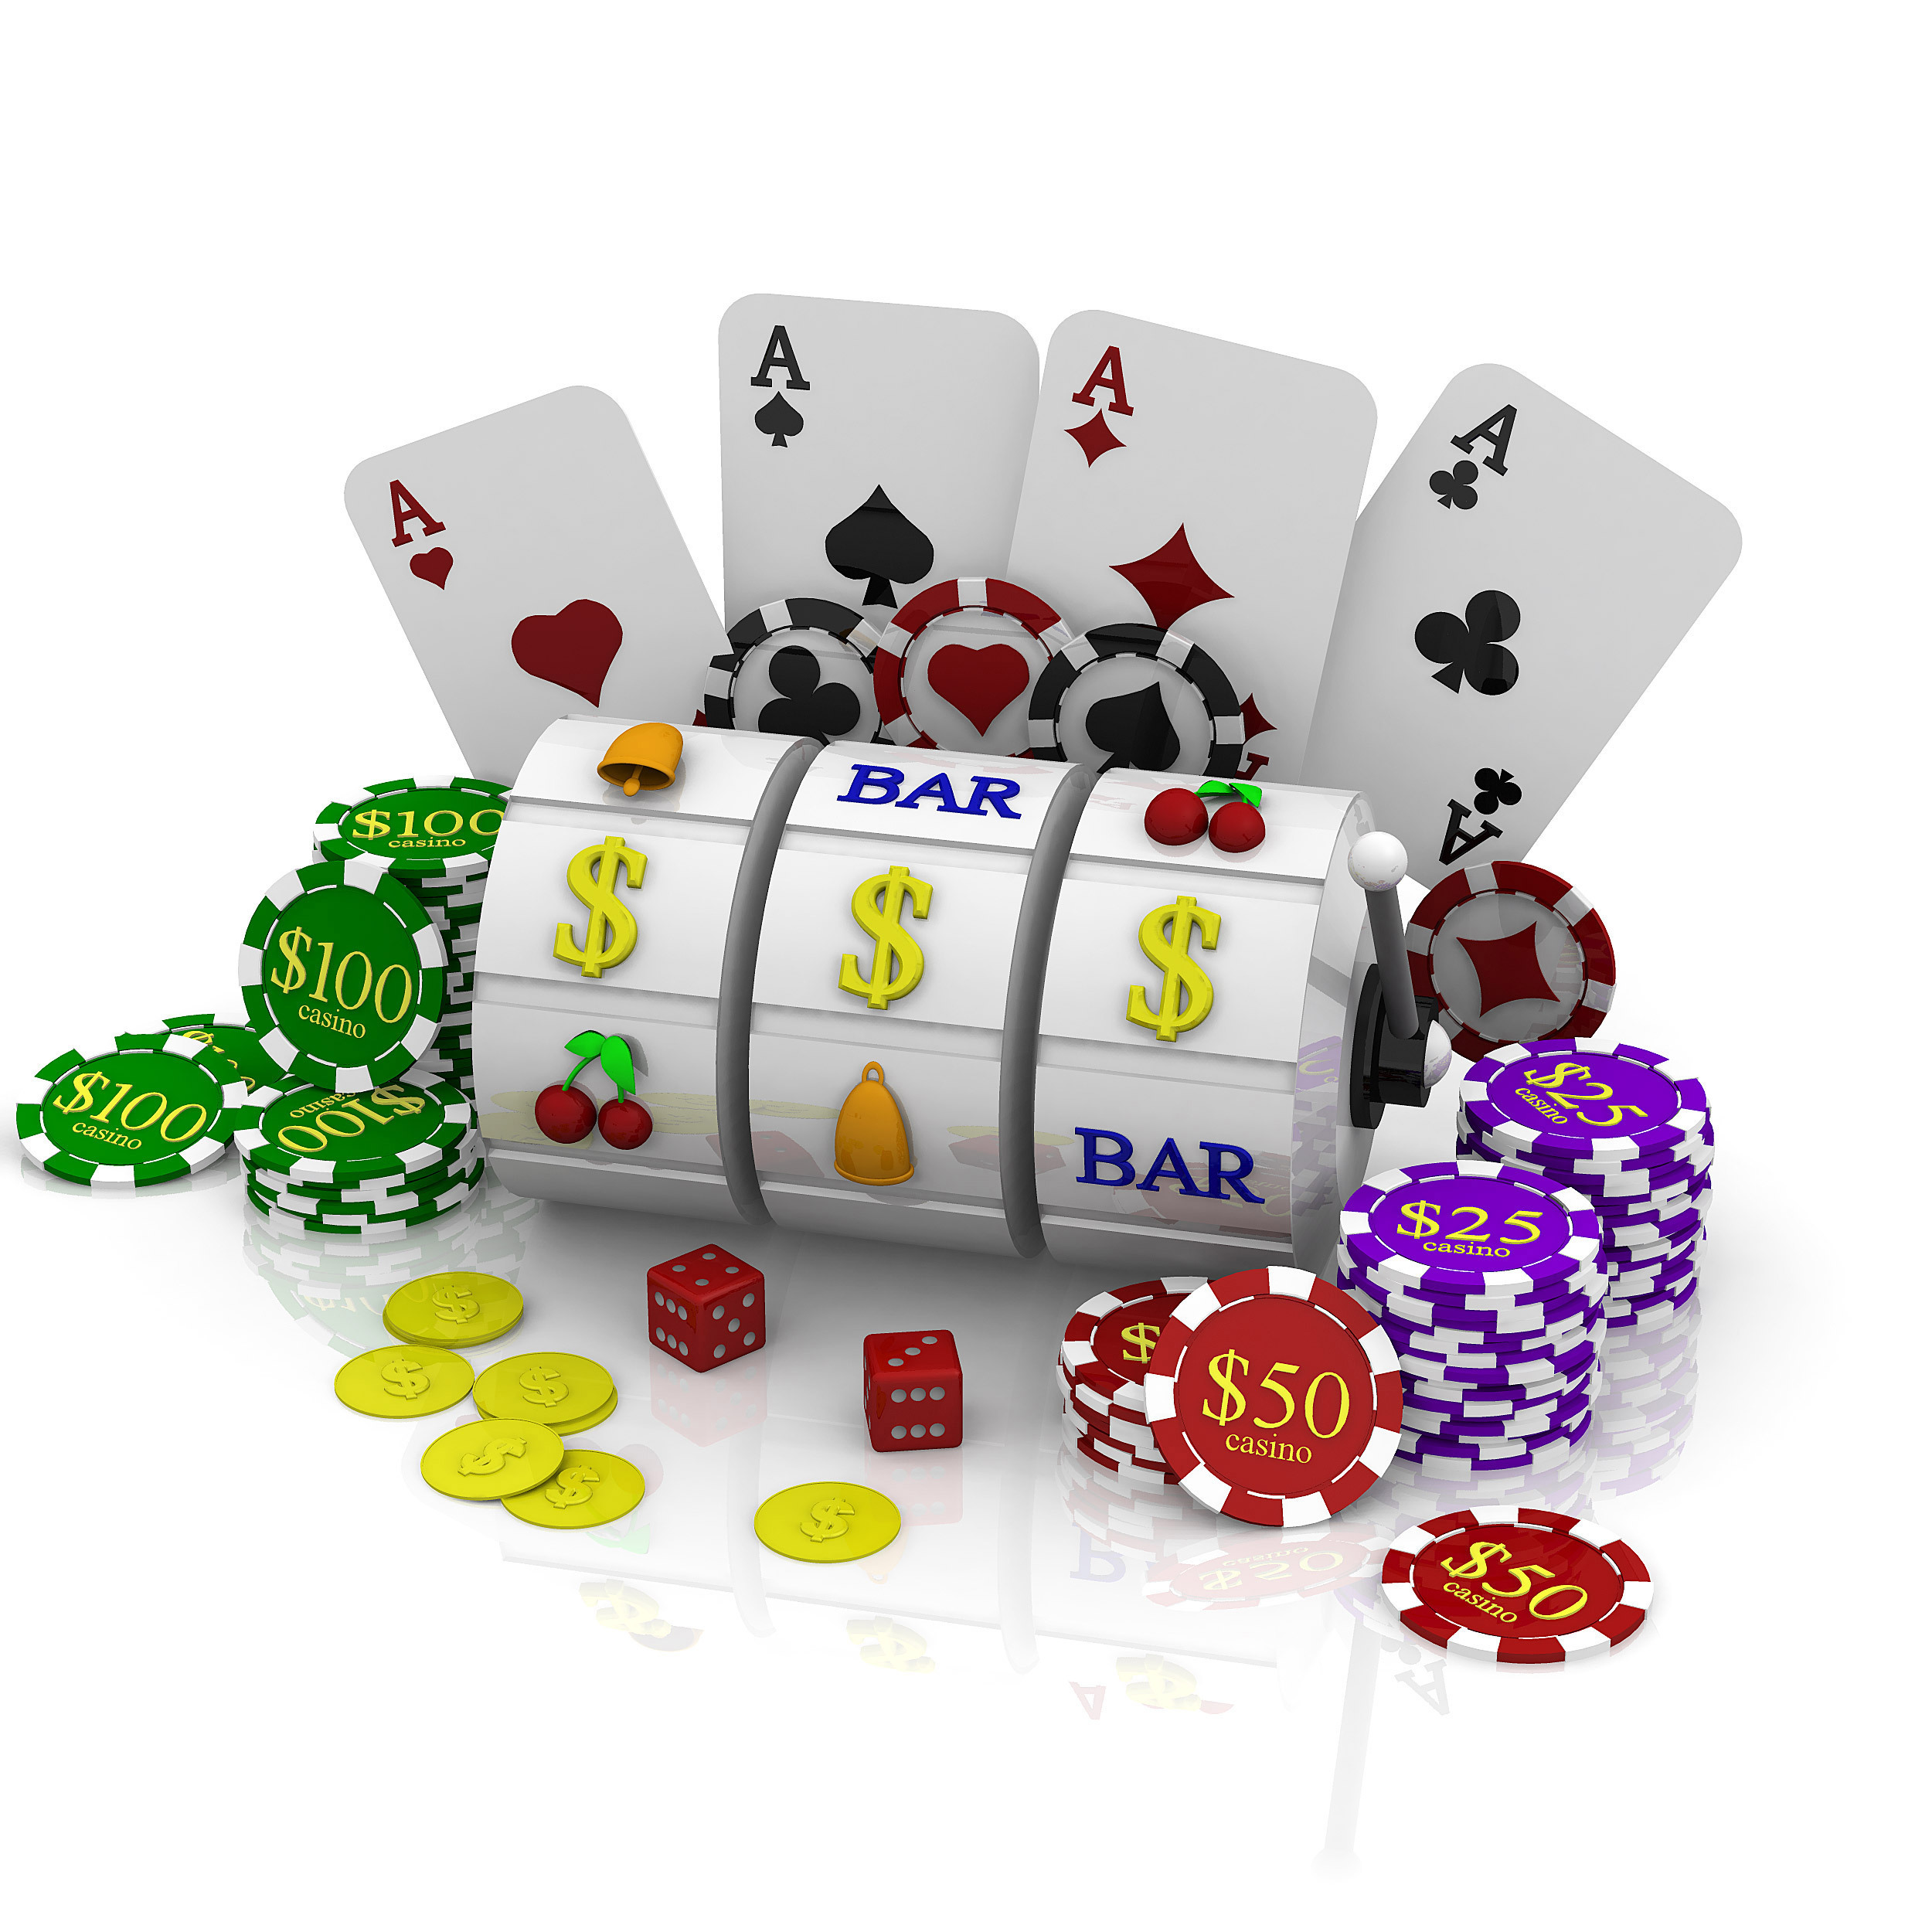 Which Casinos Offer This Payment Processor As A Deposit And Withdrawal Option?